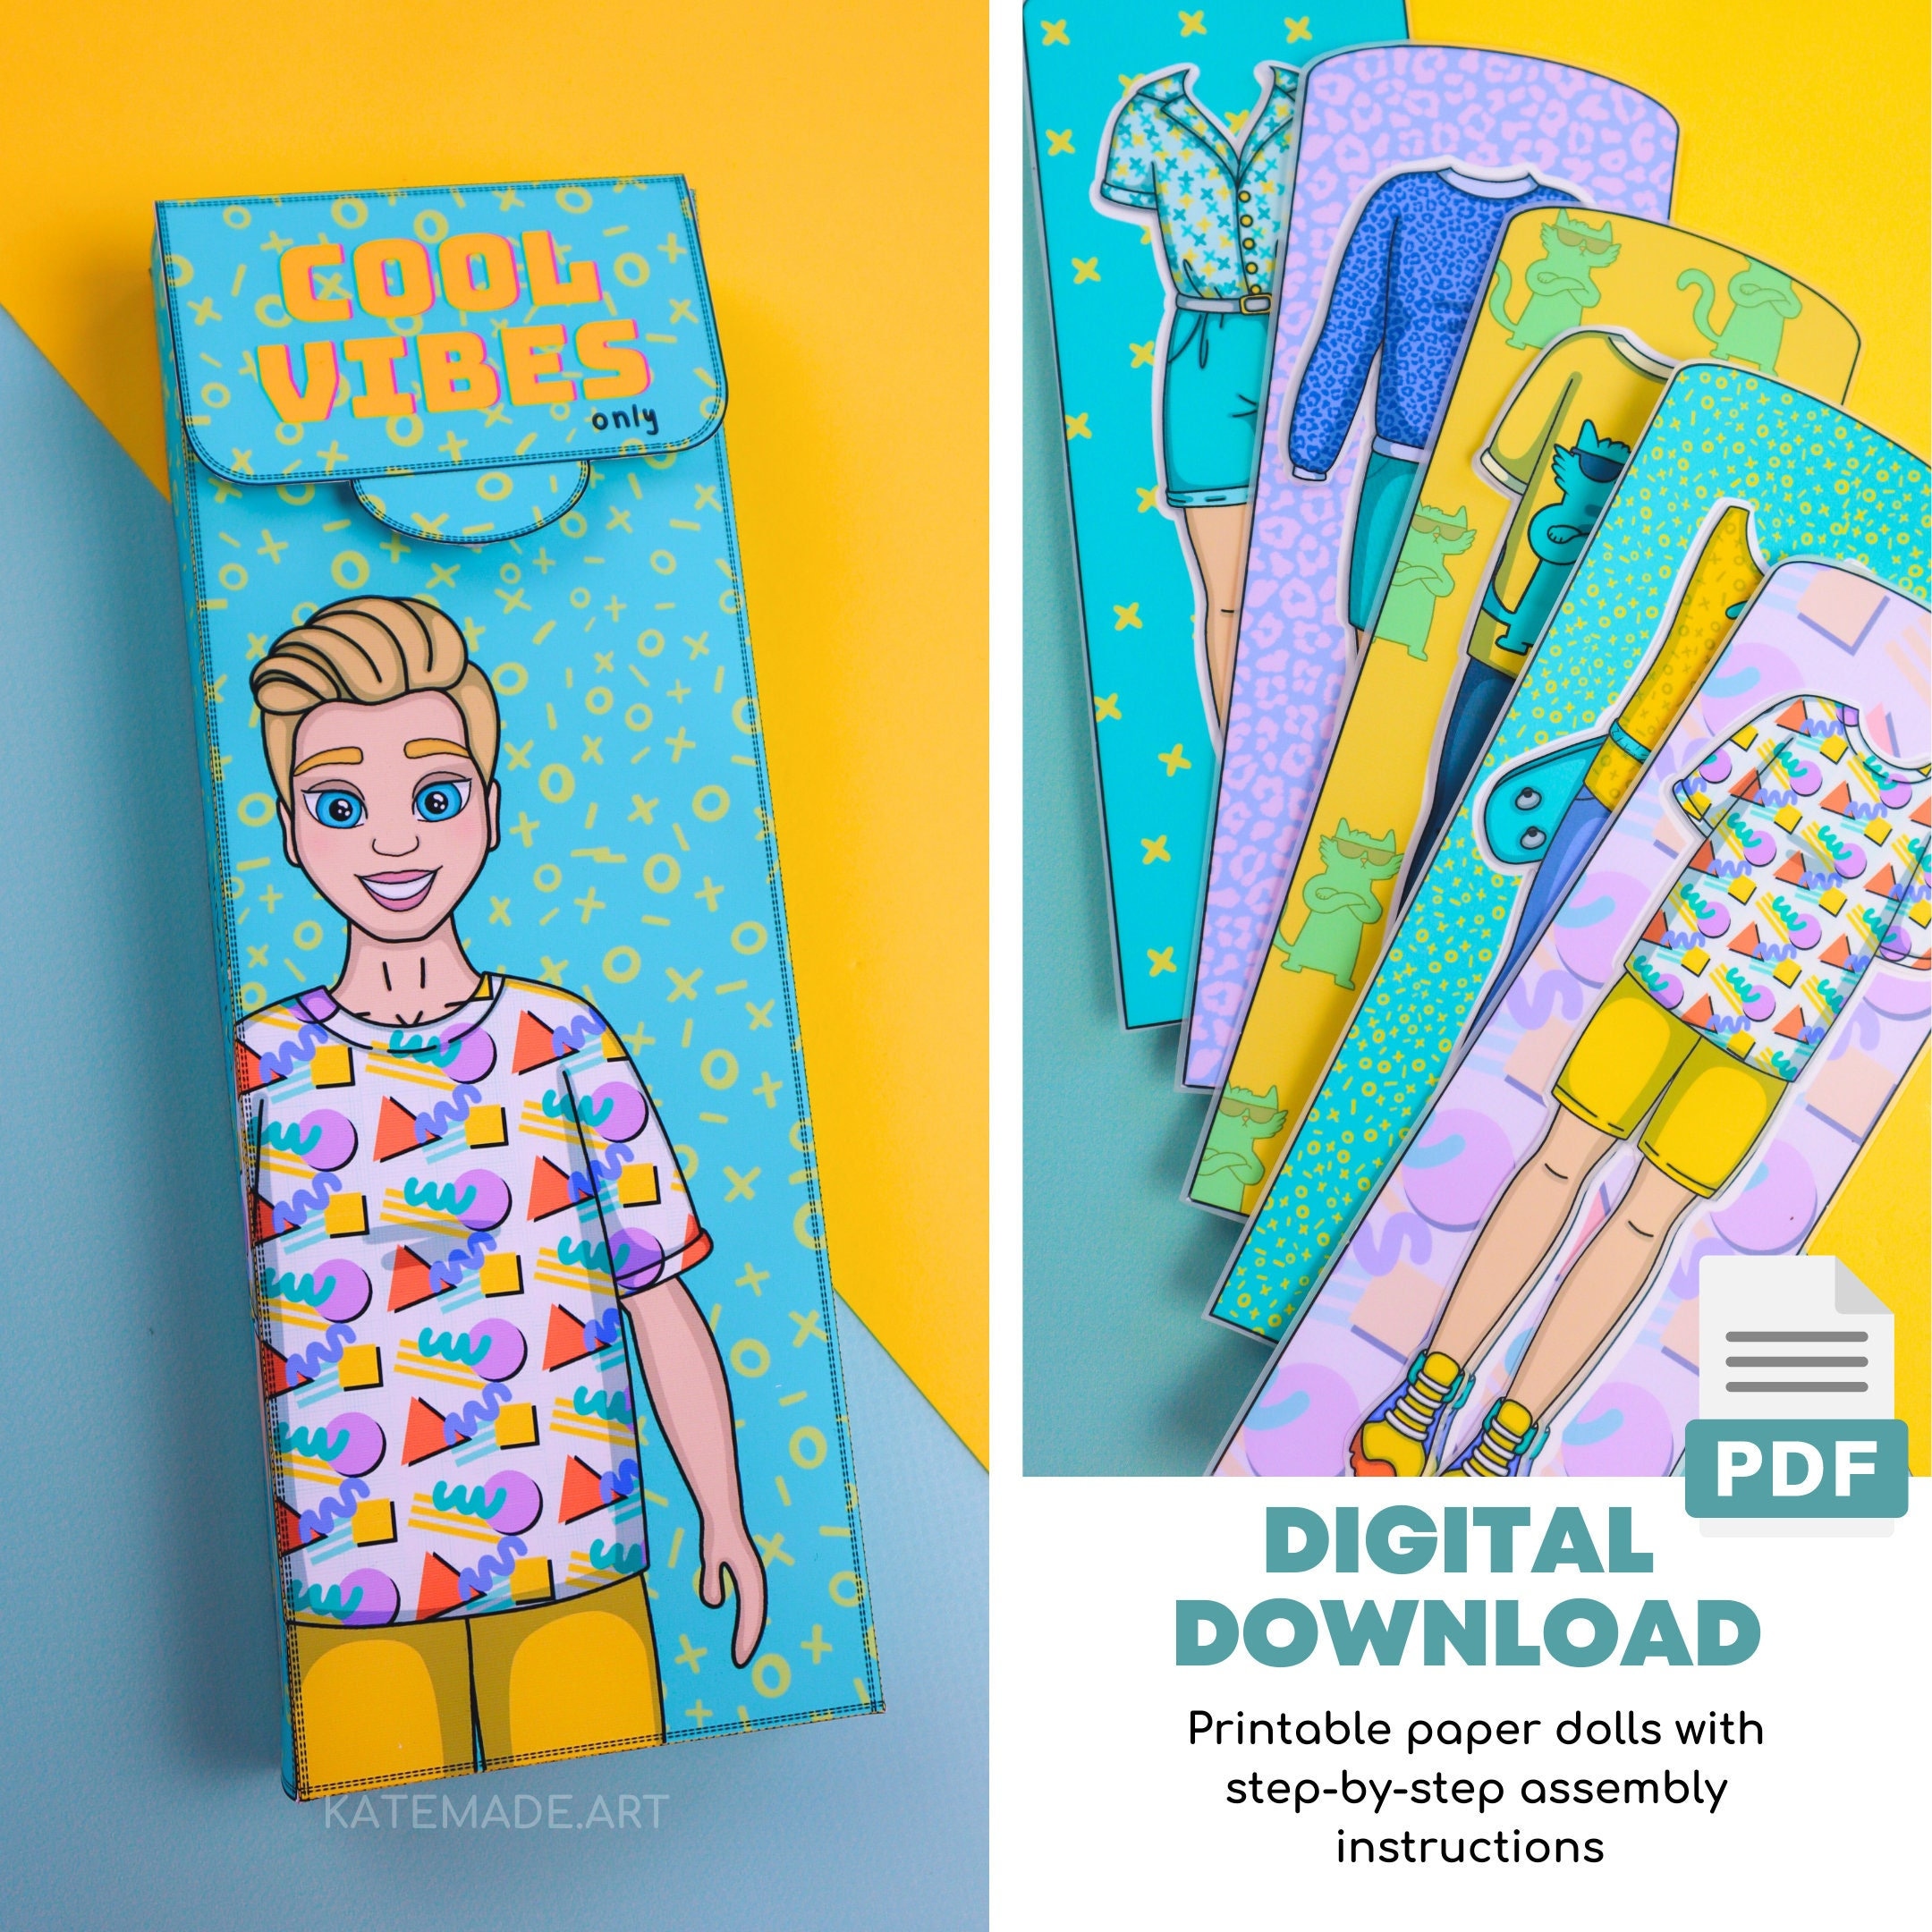 Cut Out Paper Dolls: Fashion Paper Dolls Colouring Book Edition & Dress Up for Daughter or Granddaughter